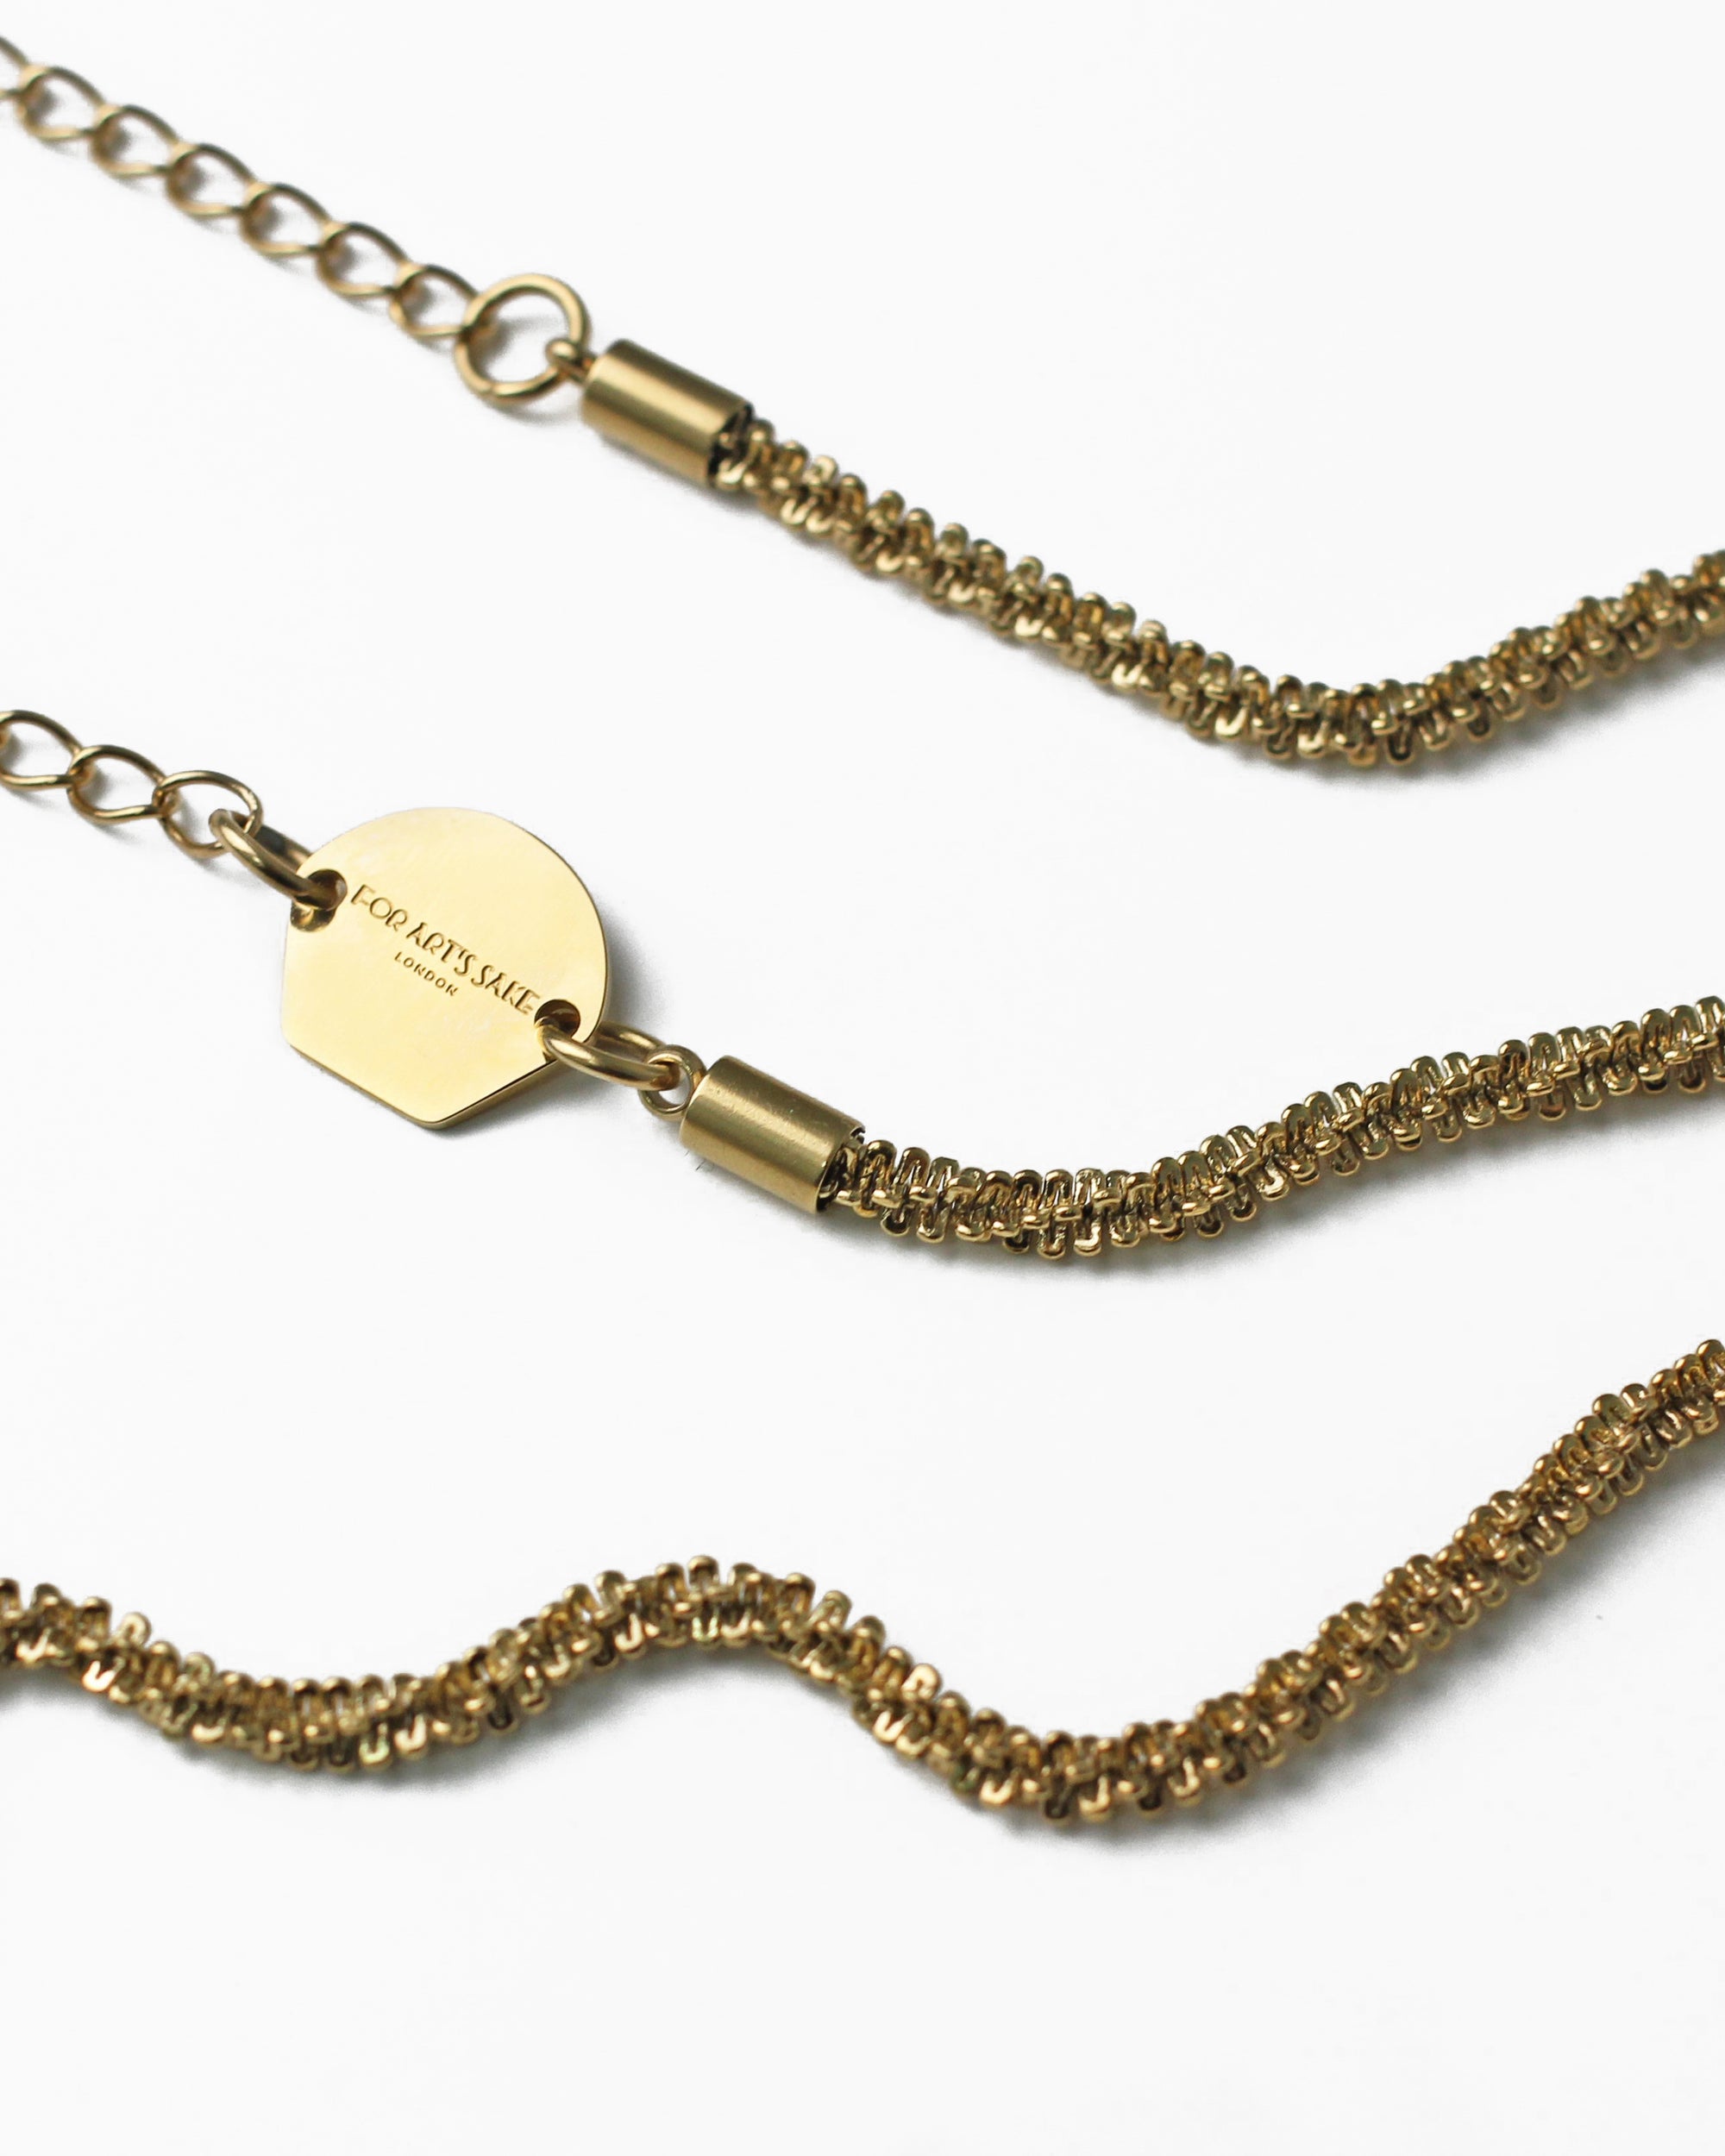 Close-up of an 18k gold-plated Mayfair Glasses Chain by For Art&#39;s Sake® featuring intricate woven links. The chain has an adjustable, heart-shaped claw closure and a small hexagonal tag engraved with the words &quot;FOR ART&#39;S SAKE.&quot; The background is white, highlighting the exquisite details of the chain and tag.